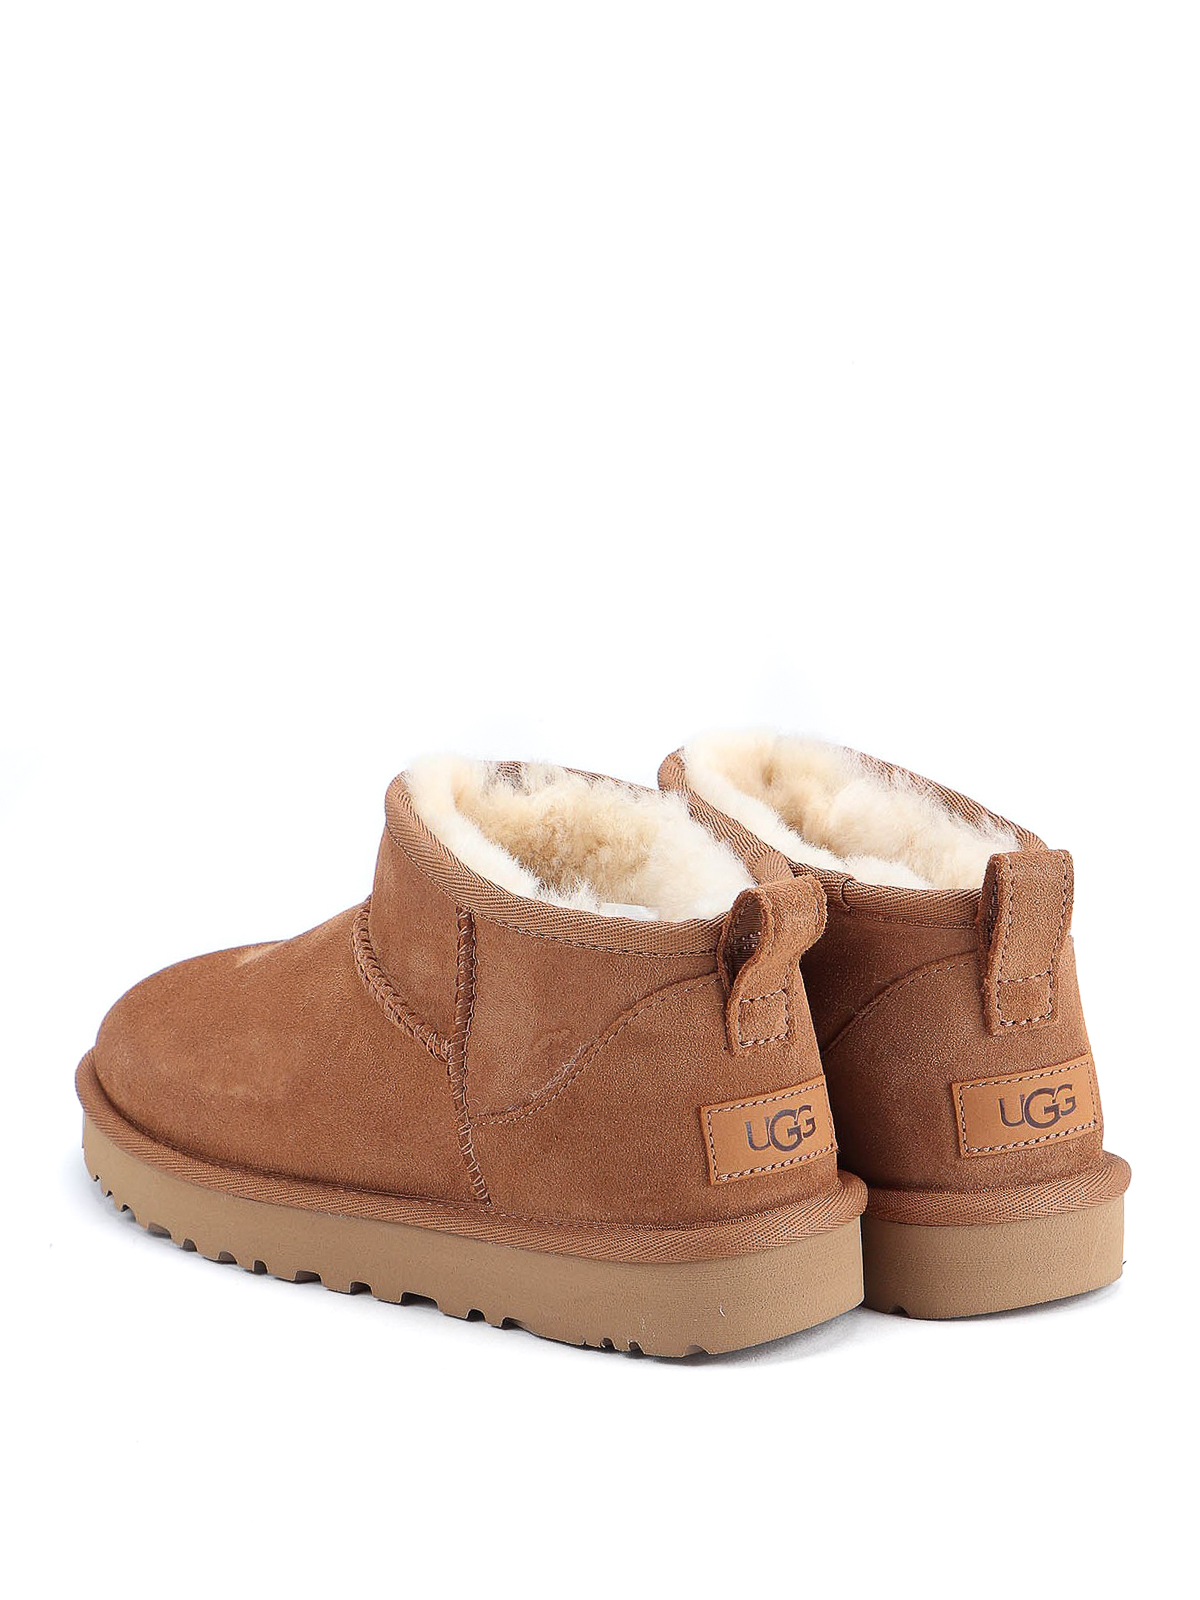 ugg classic ankle boots